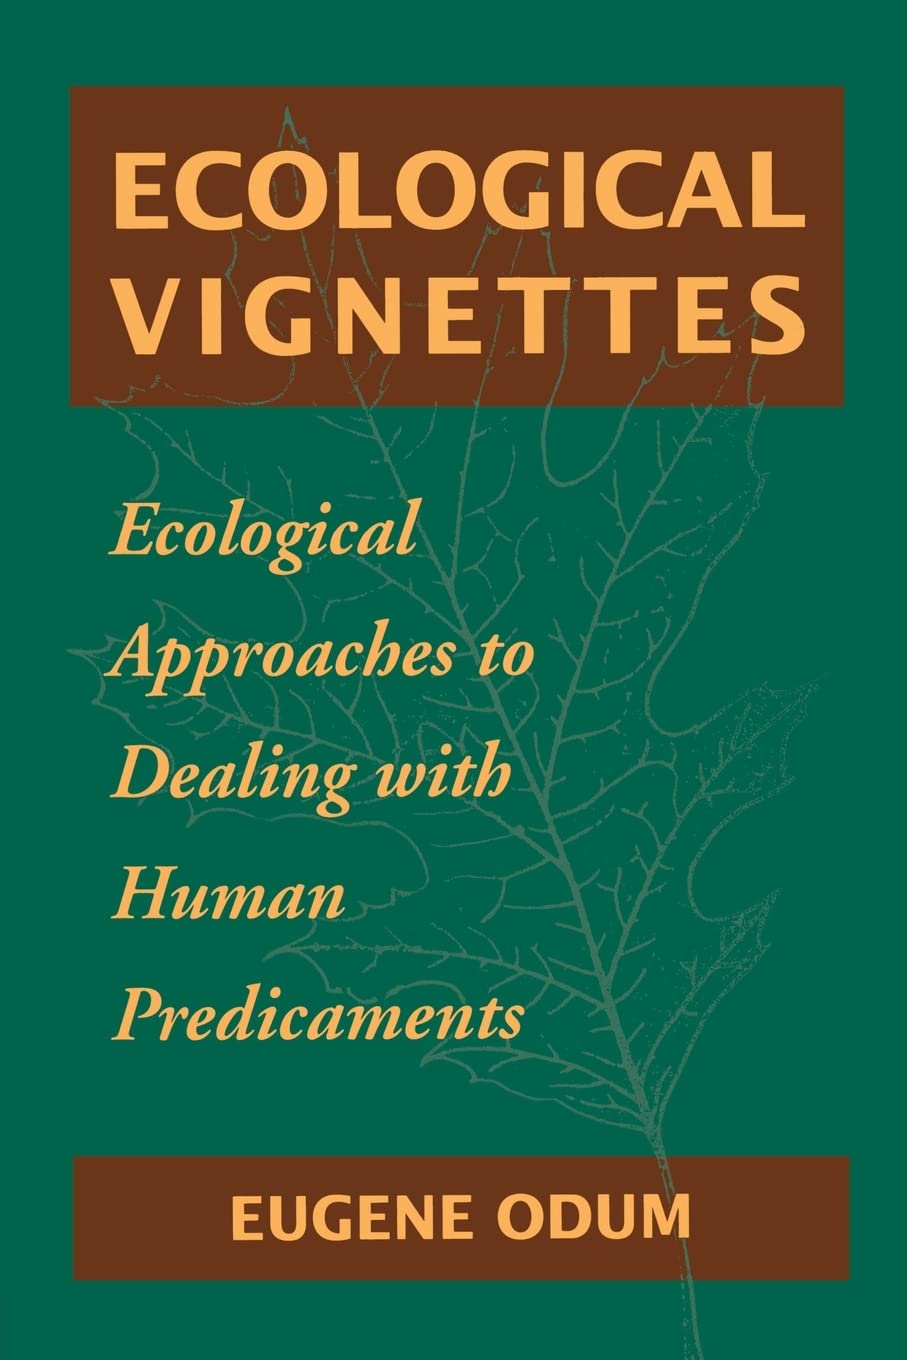 Ecological vignettes ecological approaches to human predicaments